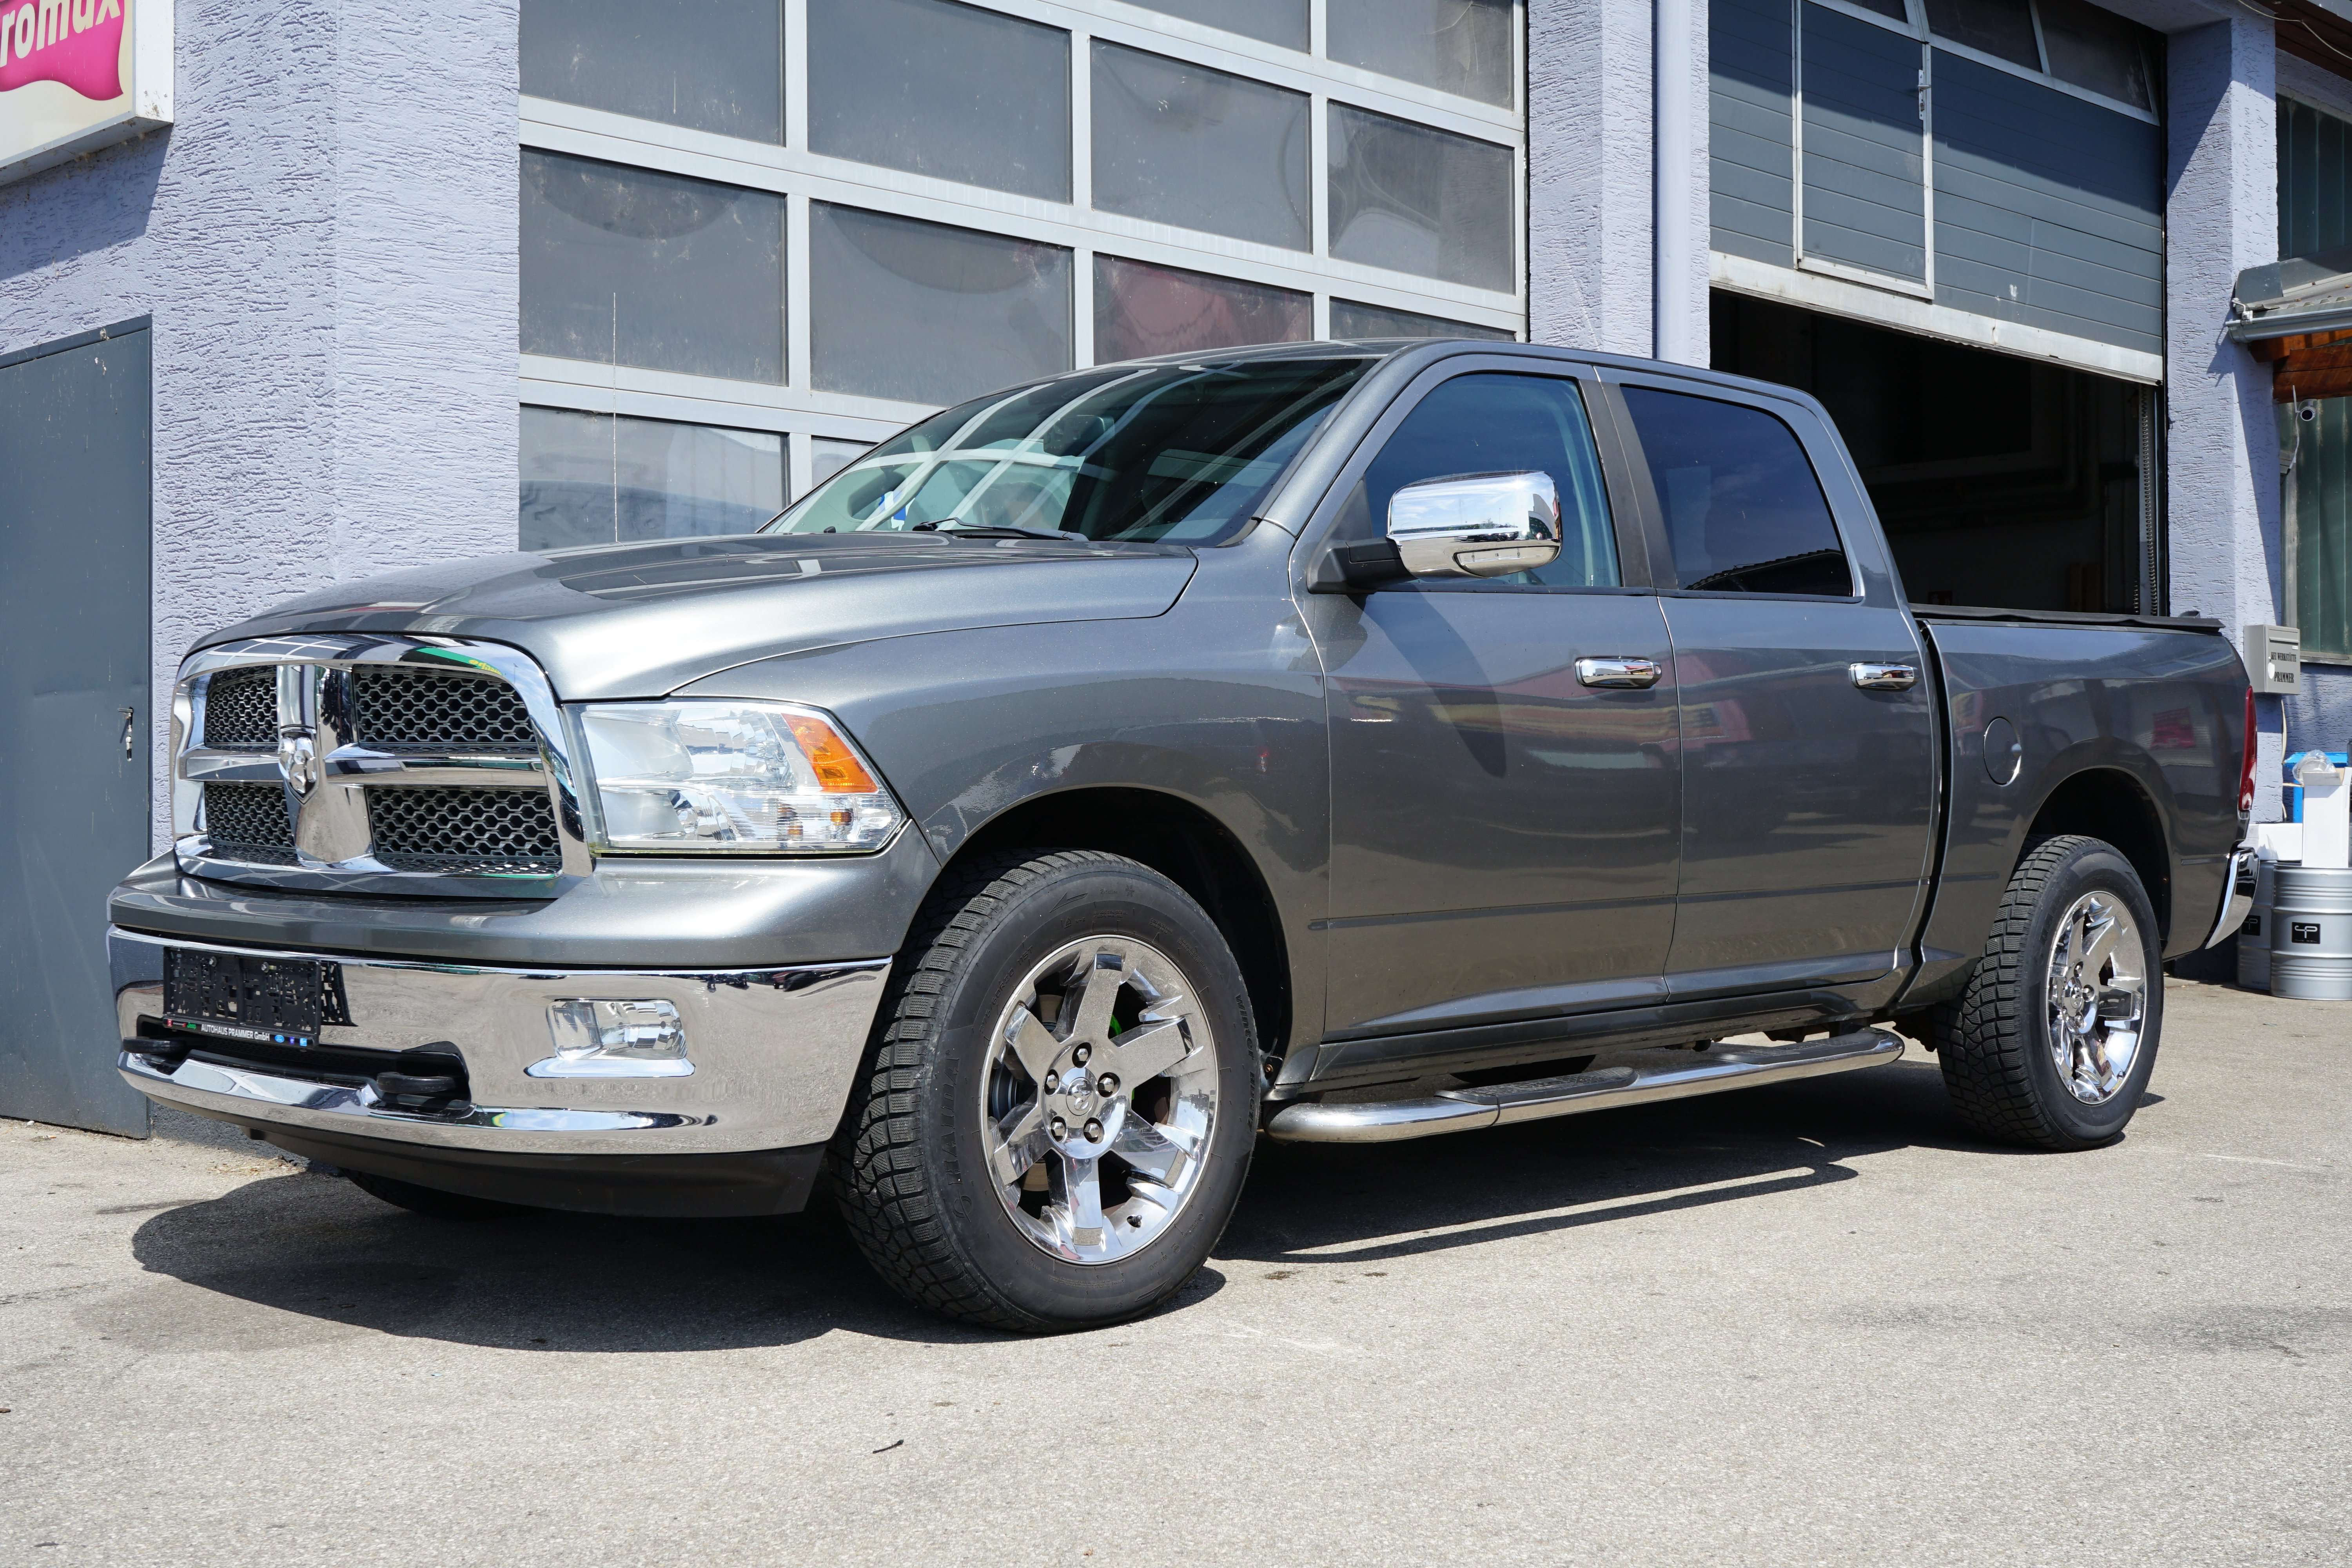 RAM 1500 Off-Road/Pick-up in Grey used in Regau for € 26,990.-